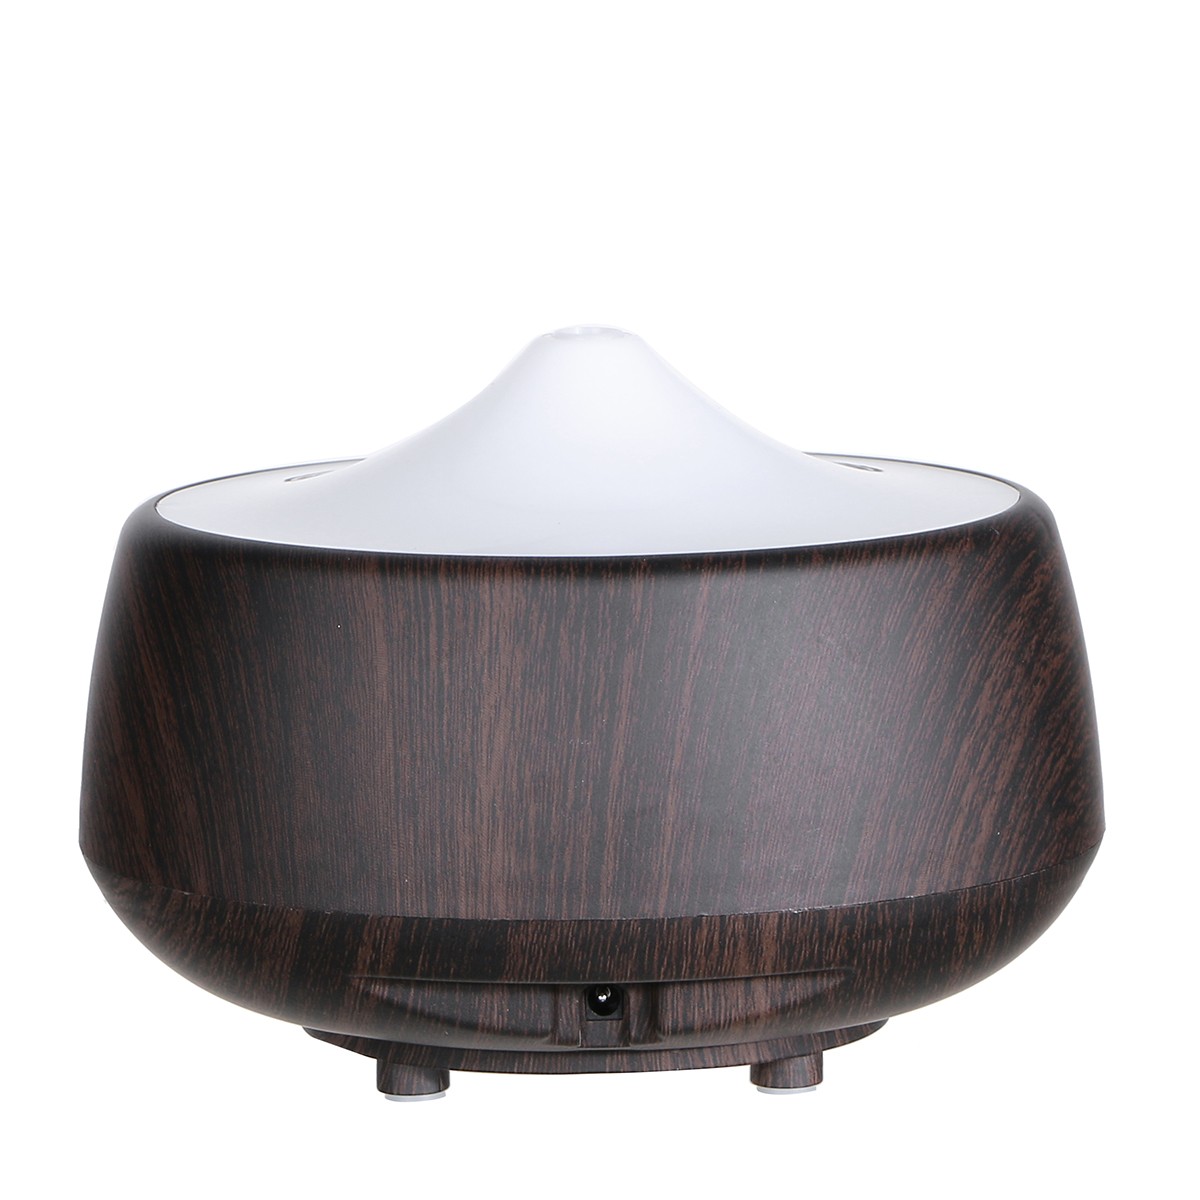 110-240V-7-Color-LED-Ultrasonic-Air-Humidifier-Aroma-Atomizer-Diffuser-Steam-Air-Purifier-1304539-6